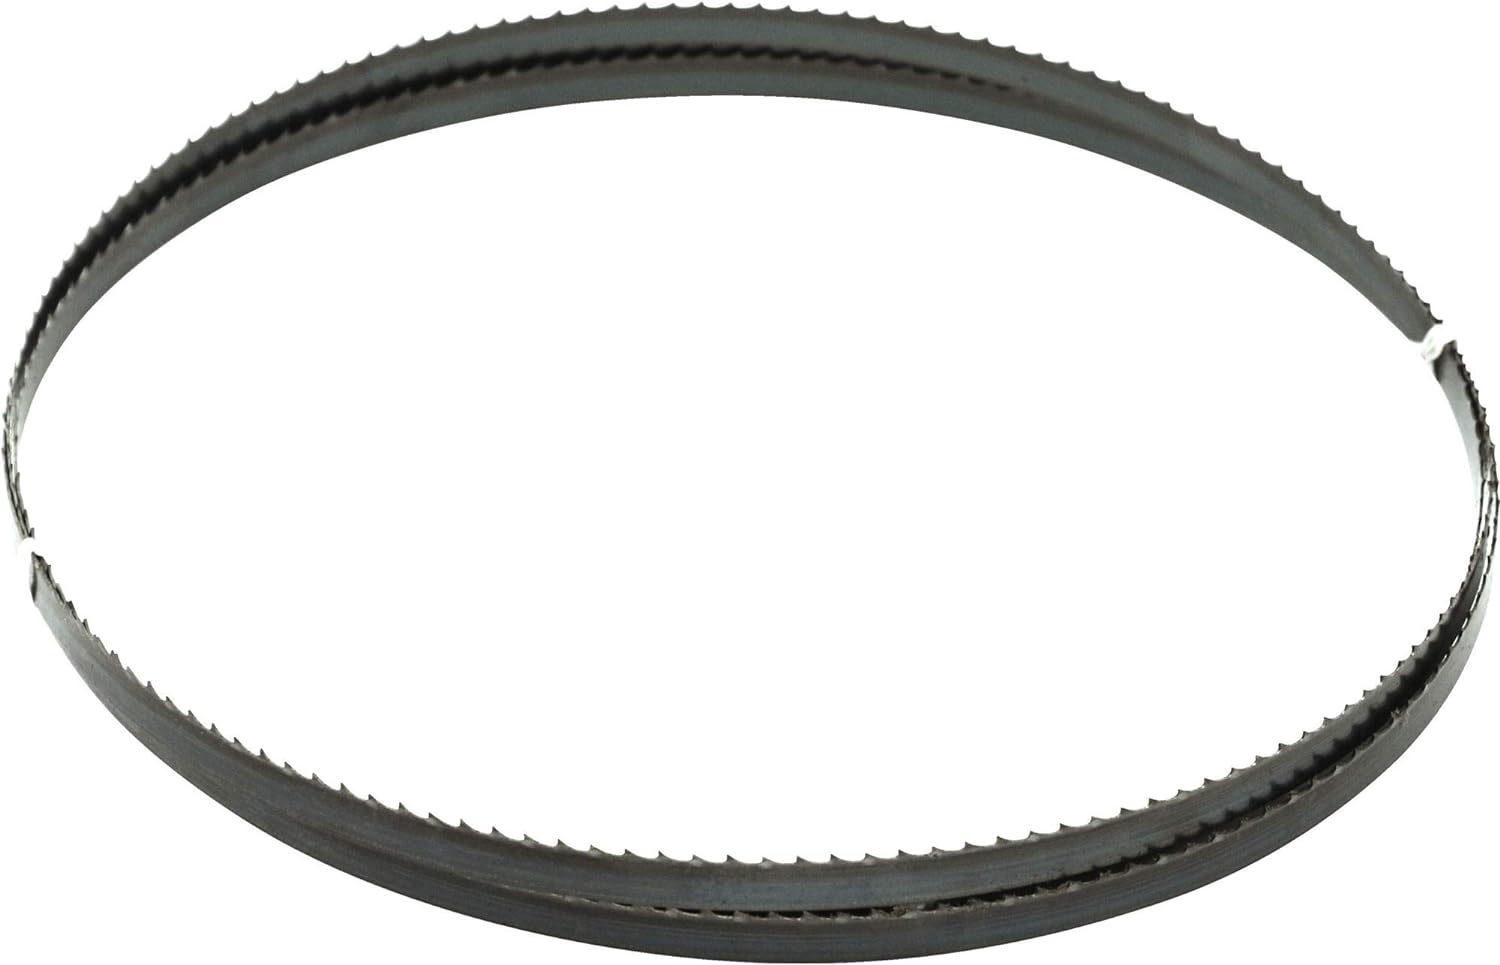 Jet Wbsb-116124 Bandsaw Blade, 116 X 1/2 X 4 Tpi (For Jwbs-14Sfx Bandsaws). - $51.99